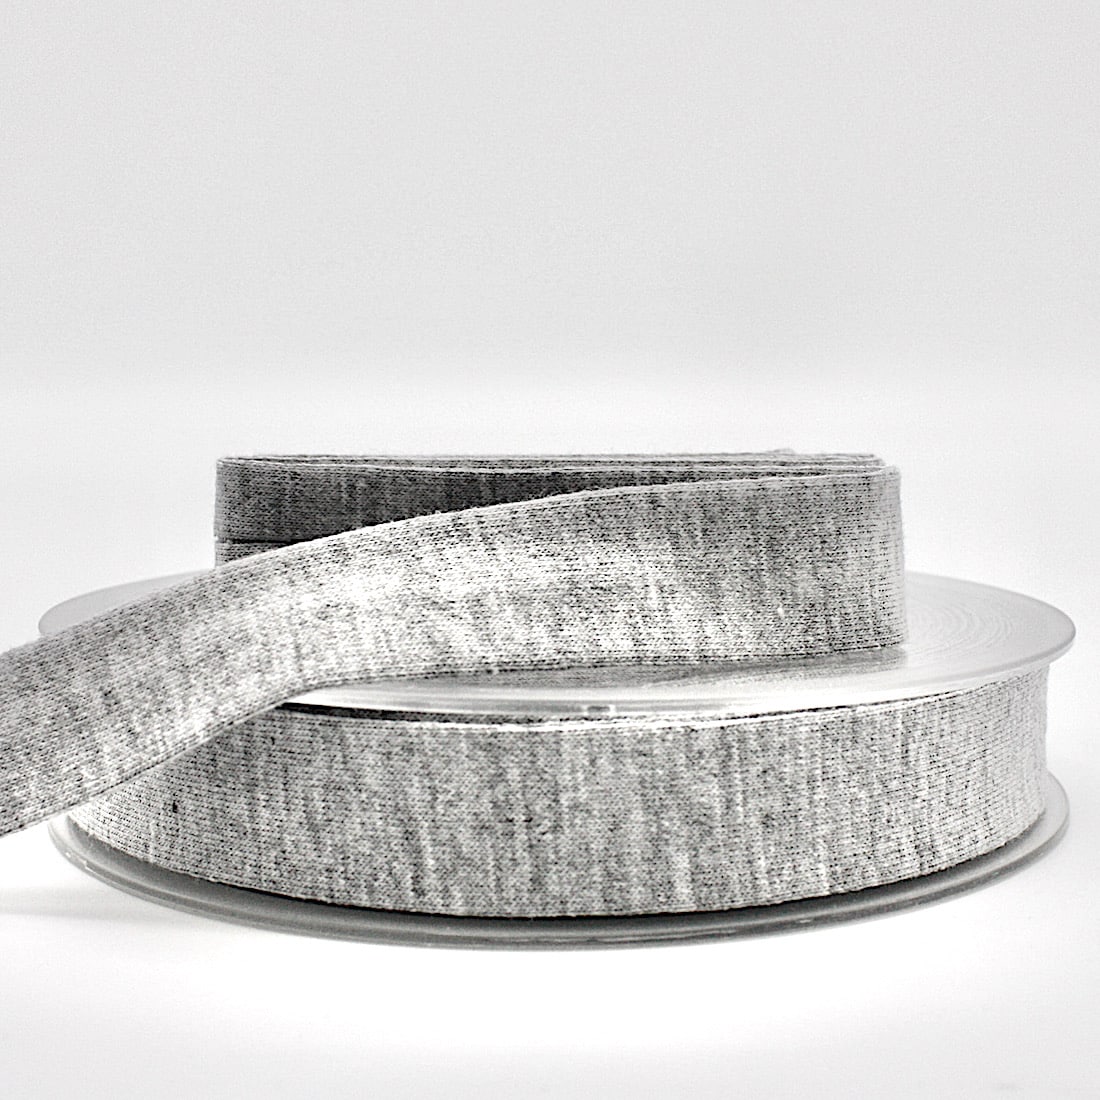 15m roll of Cotton Jersey Bias Binding Tape with 18mm width in Grey Melange